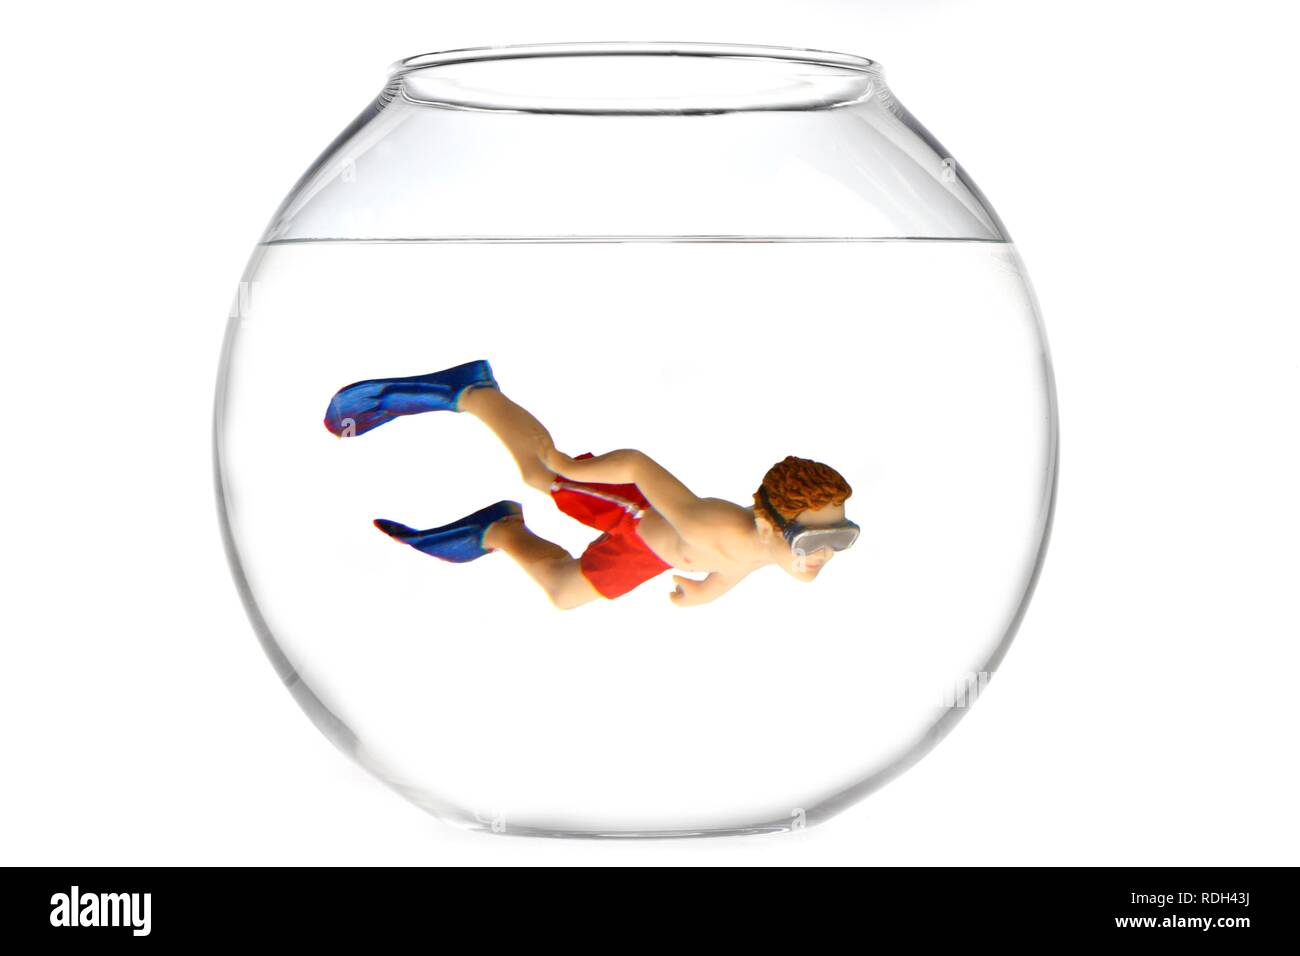 Toy boy swimming with diving goggles and flippers in a fish bowl, illustration Stock Photo